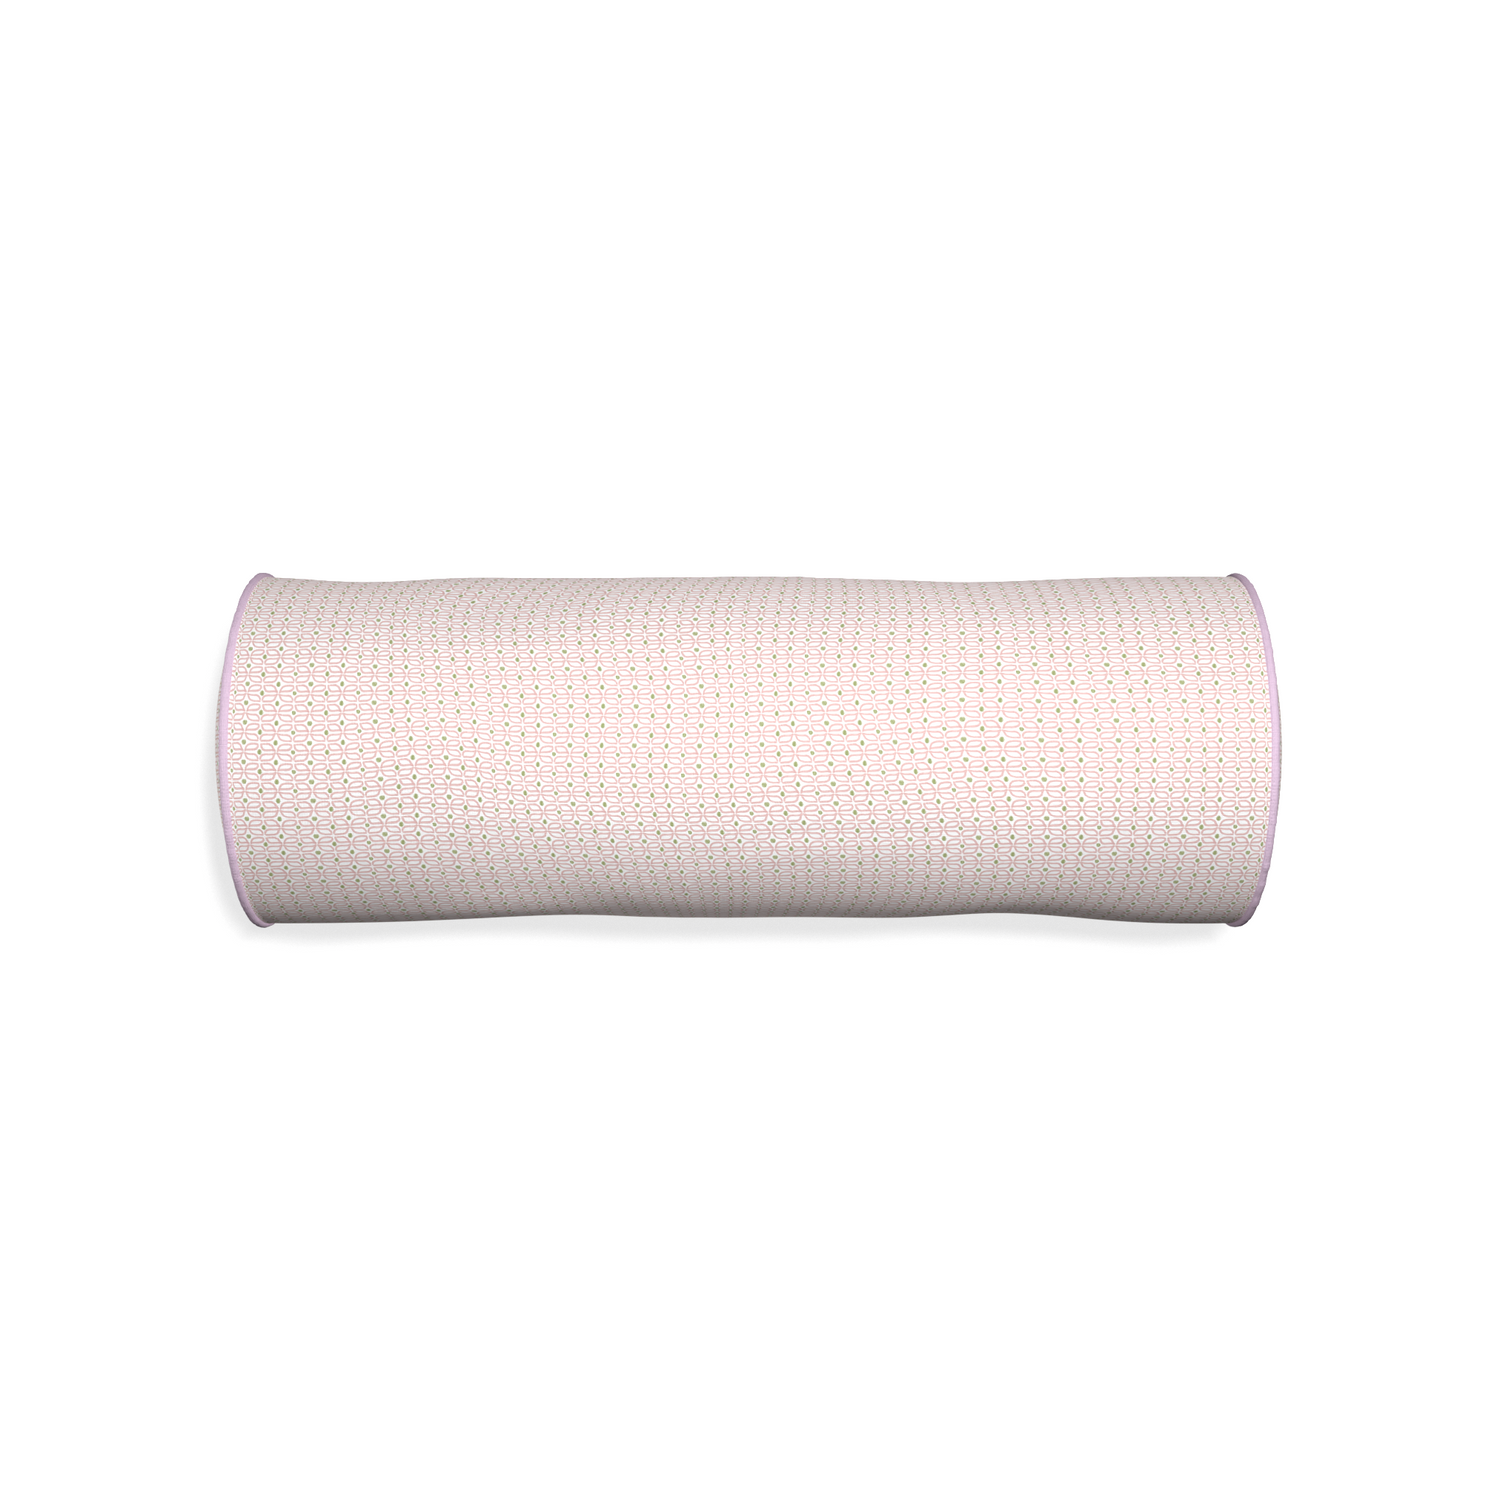 Bolster loomi pink custom pink geometricpillow with l piping on white background